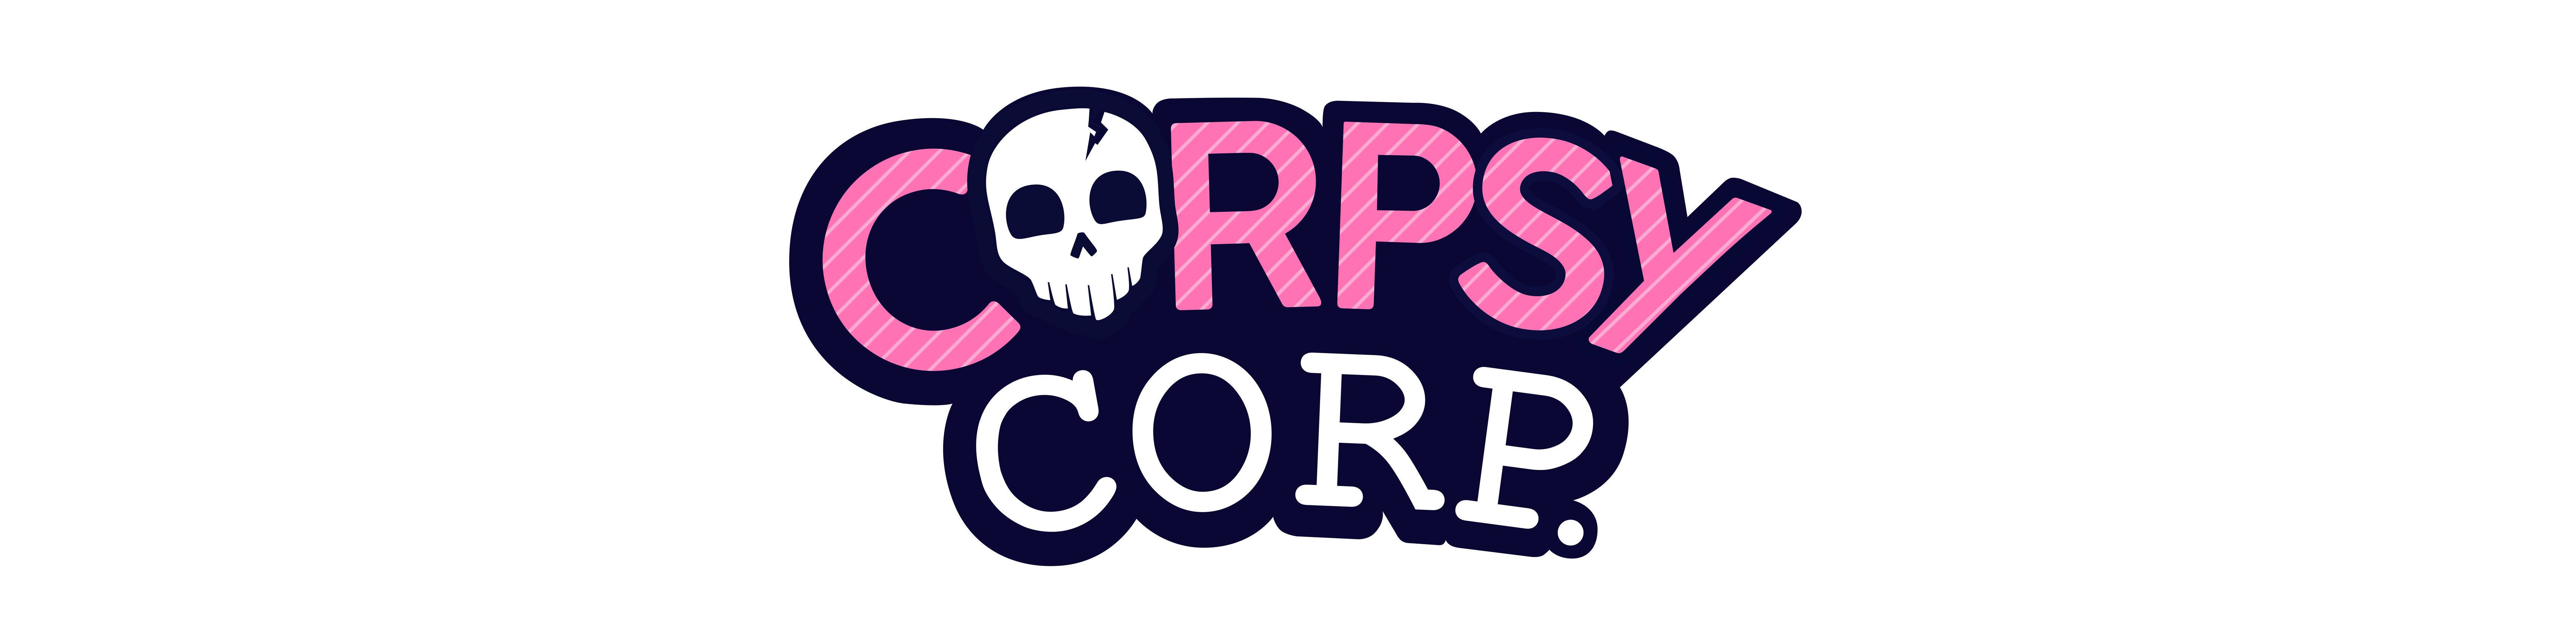 Corpsy Corp